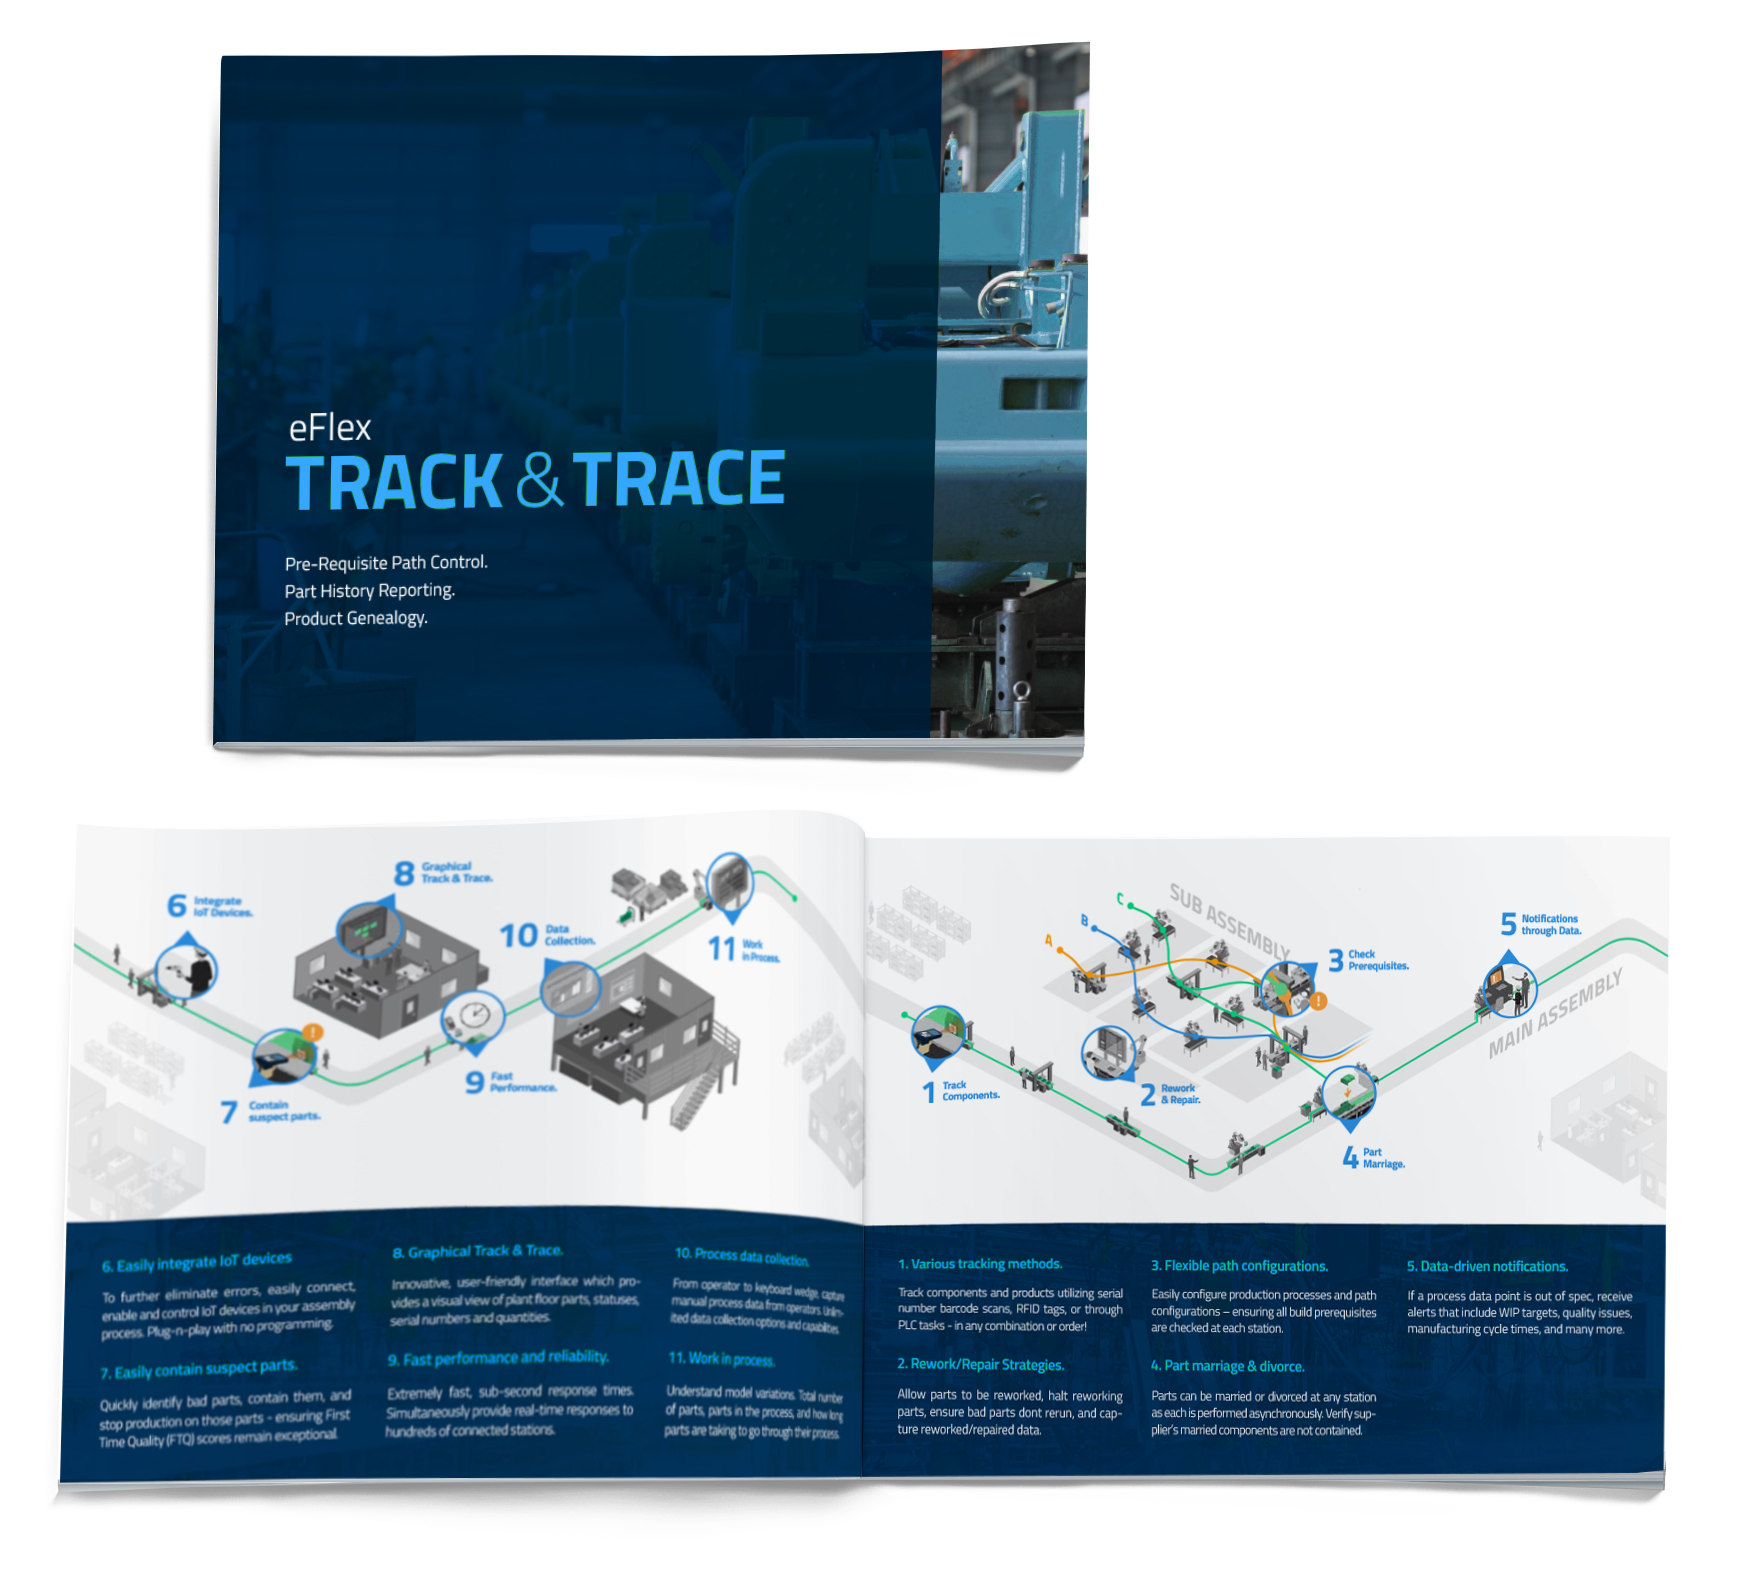 eFlex track and trace brochure - learn how to add traceability to your plant floor.